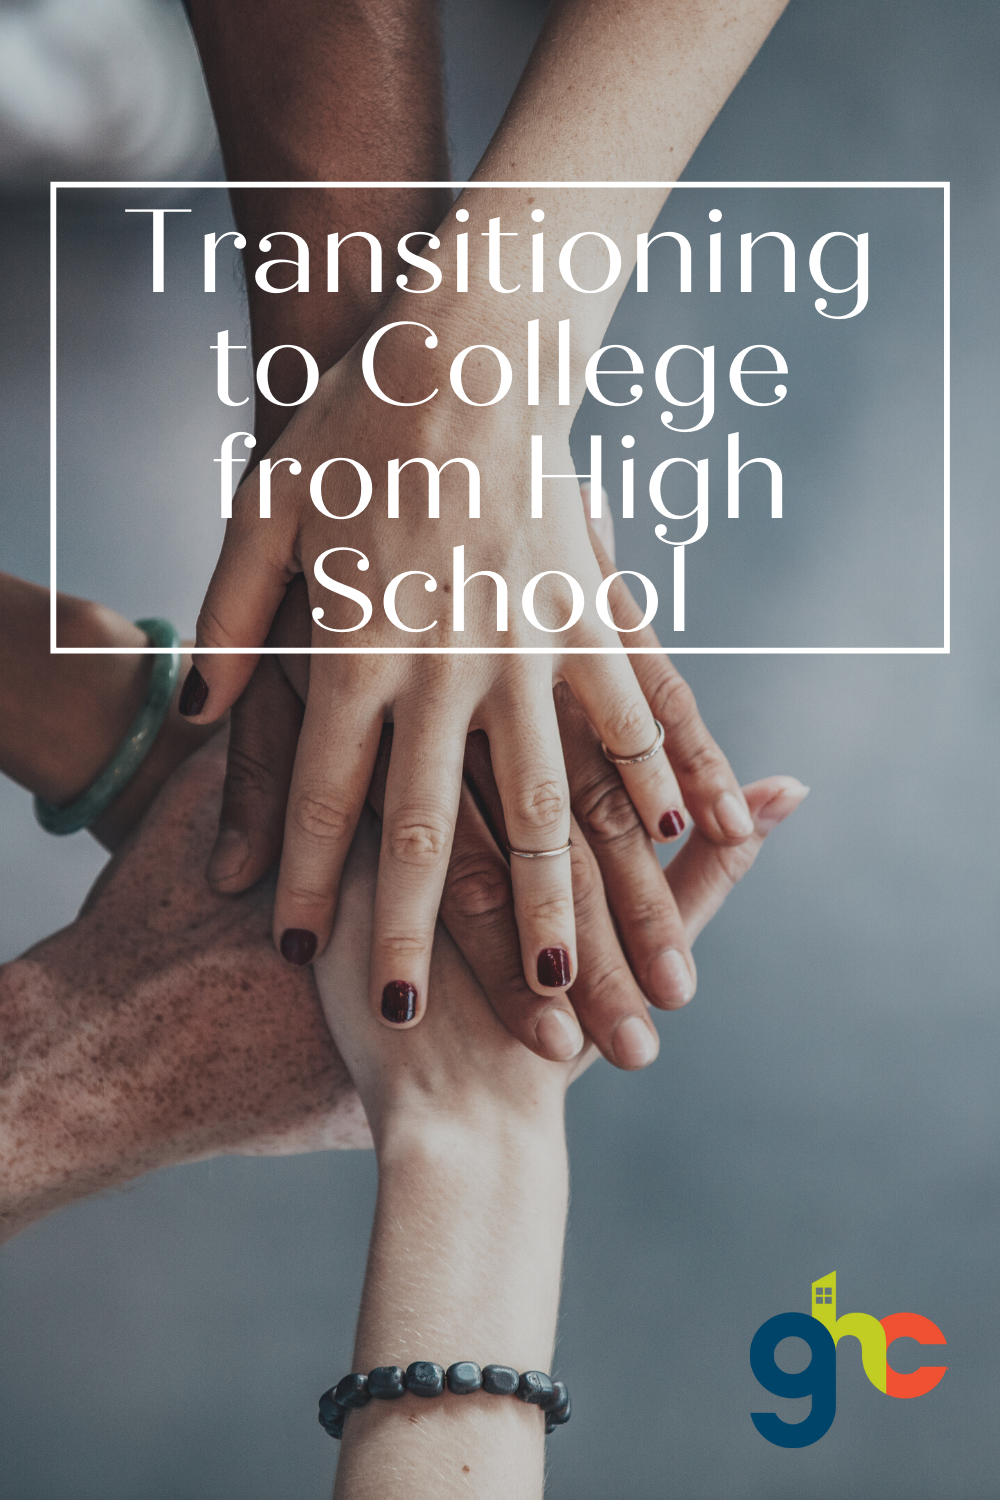 Transitioning to College from High School